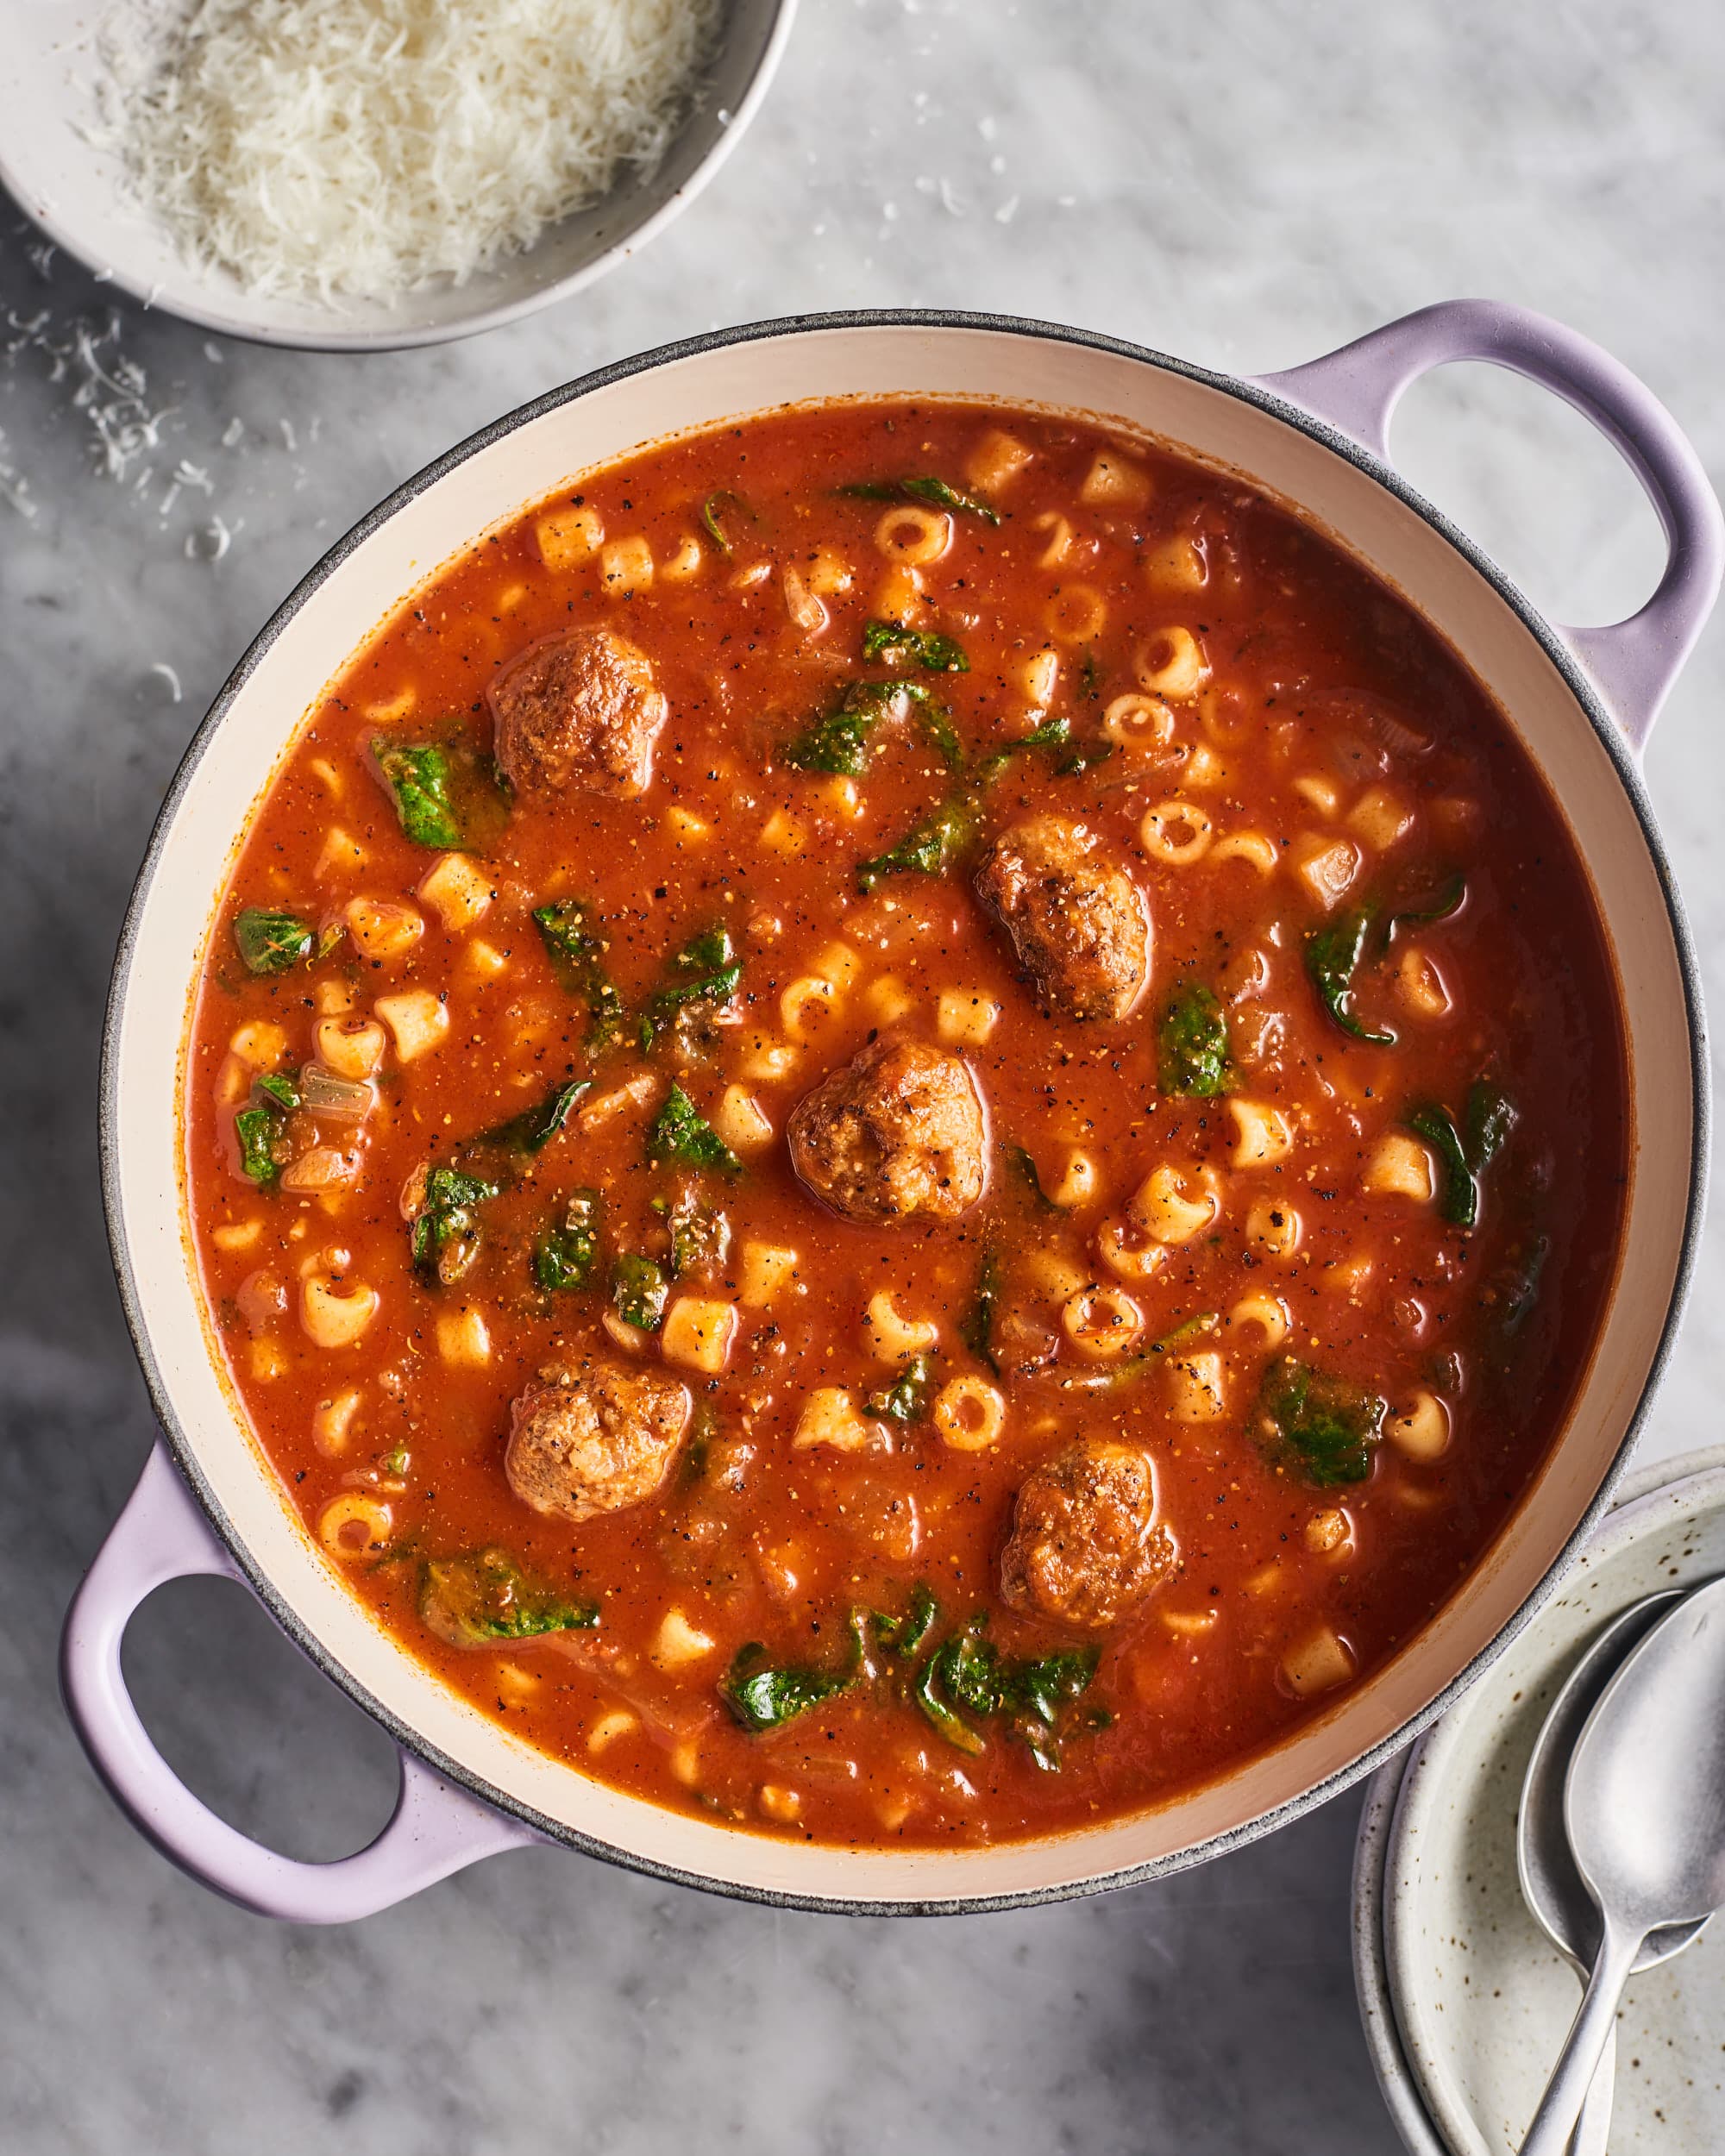 https://cdn.apartmenttherapy.info/image/upload/v1583772121/k/Photo/Recipes/2020-03-Sausage-Meatball-Soup/Supremely-Satisfying-Sausage-Meatball-Soup_009.jpg